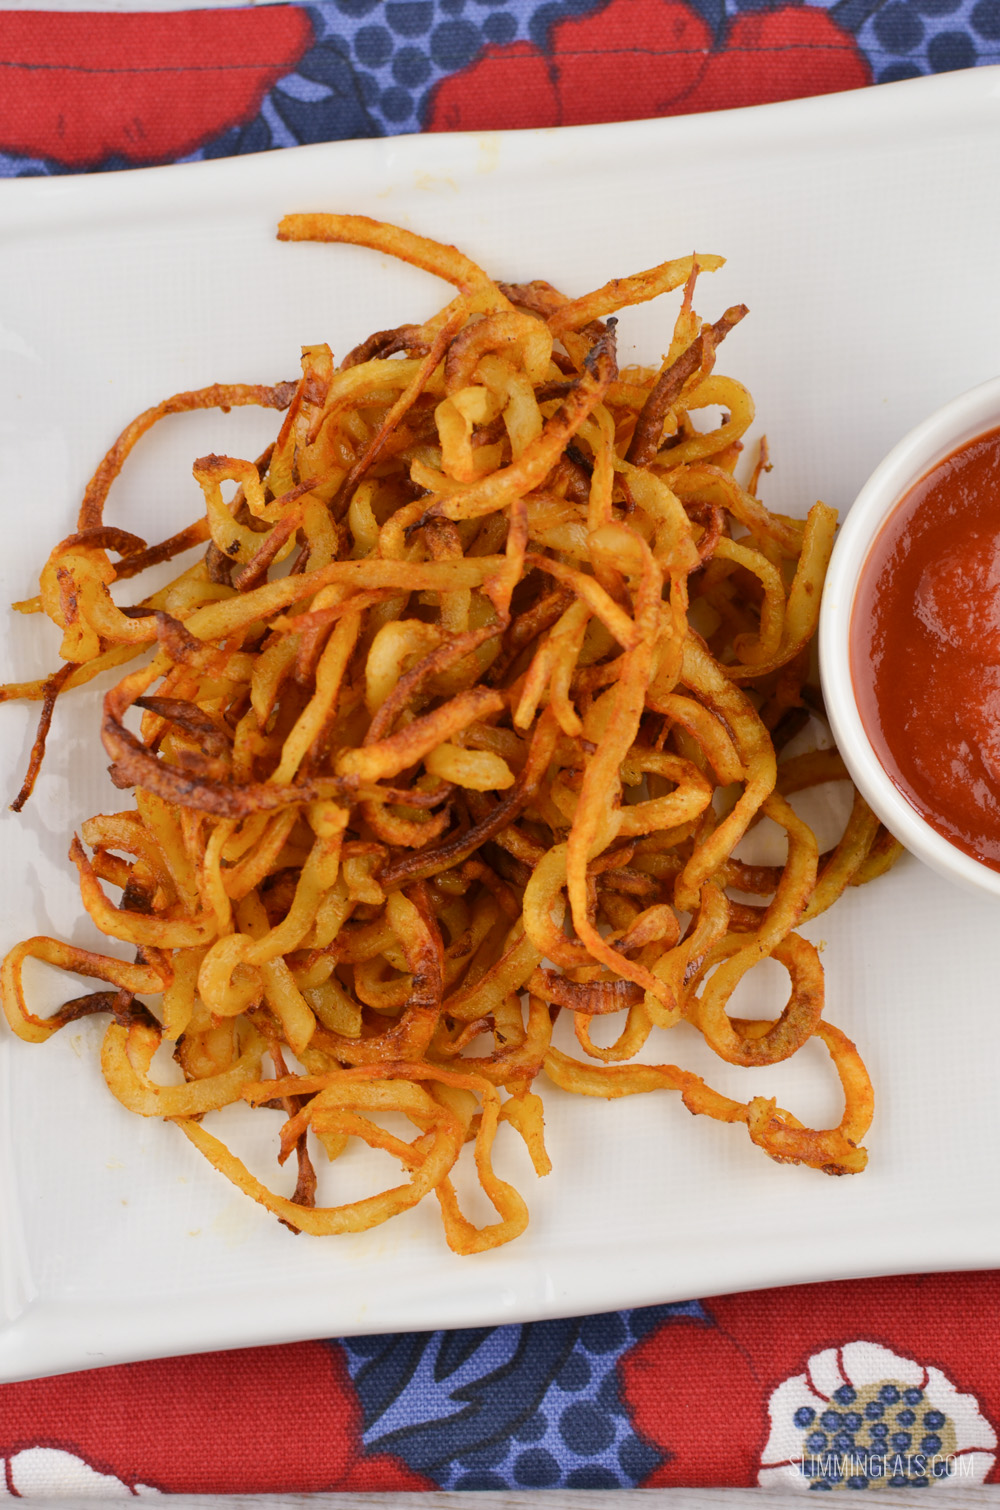 Slimming Eats Syn Free Curly Fries - gluten free, dairy free, vegetarian, Slimming World and Weight Watchers friendly